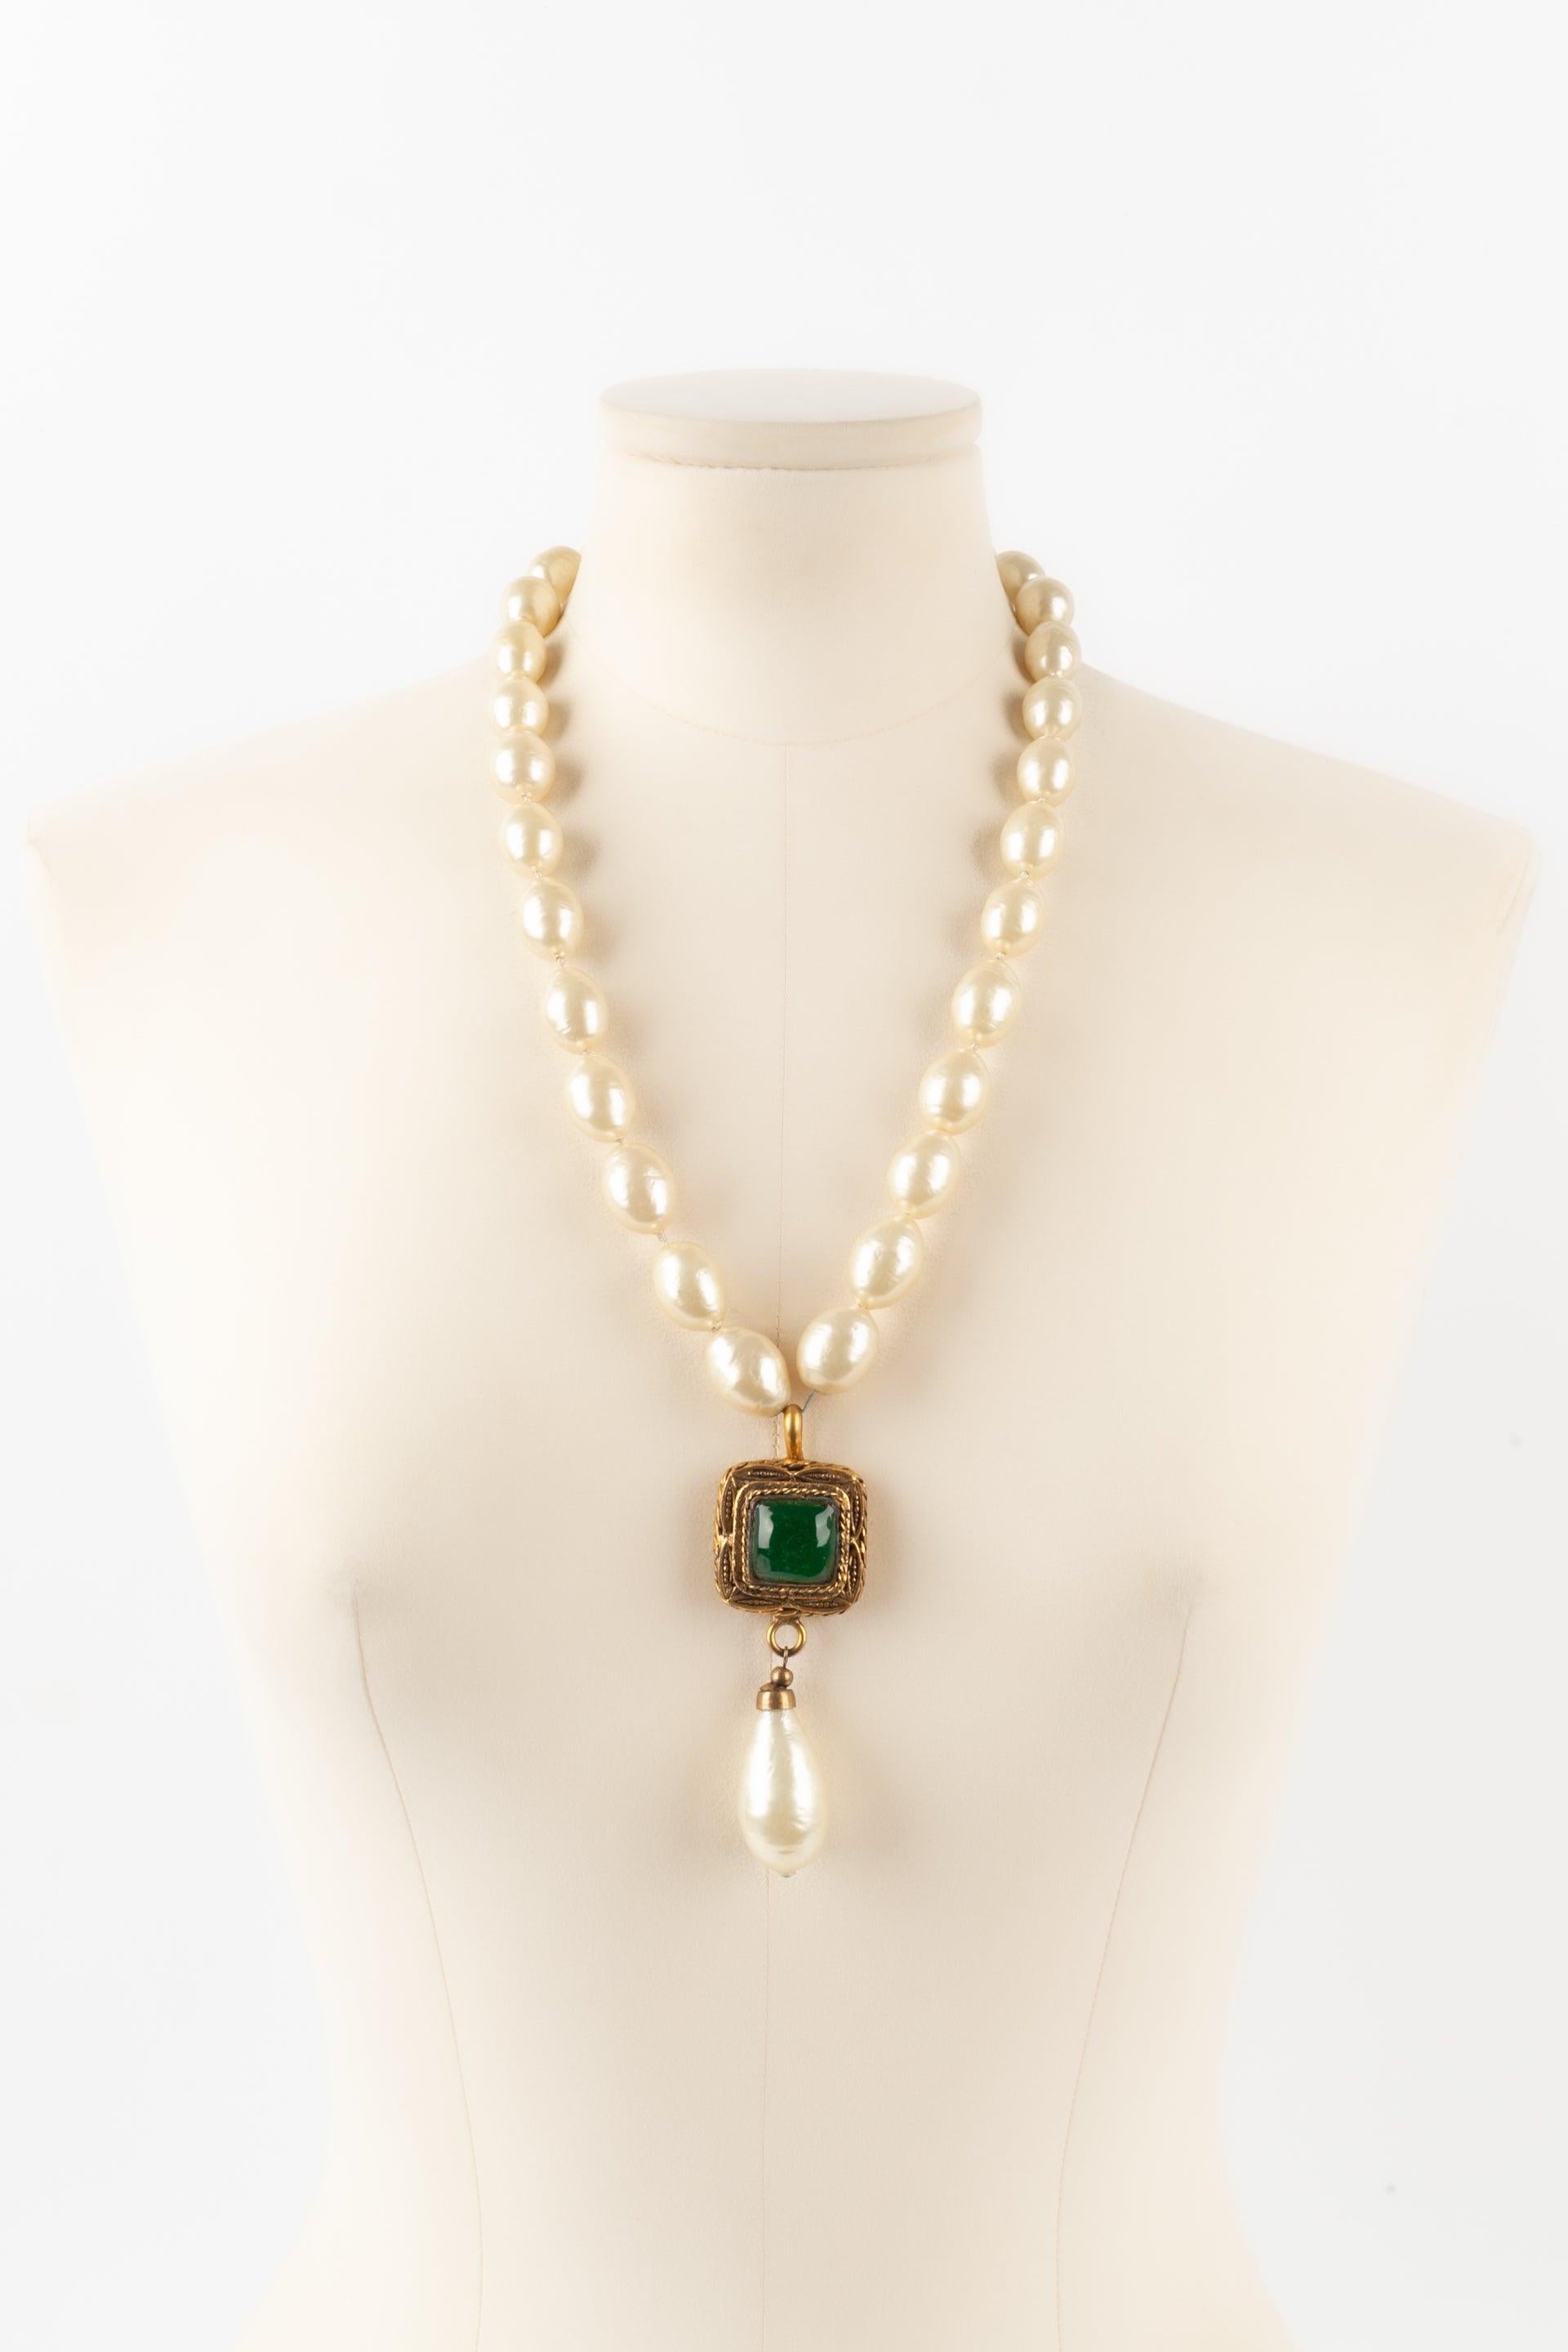 Chanel - Costume pearl necklace with a golden metal pendant and an impressive pearly drop in green glass paste. 1983 Collection.

Additional information:
Condition: Very good condition
Dimensions: Length: 58 cm to 64 cm

Seller Reference: CB183